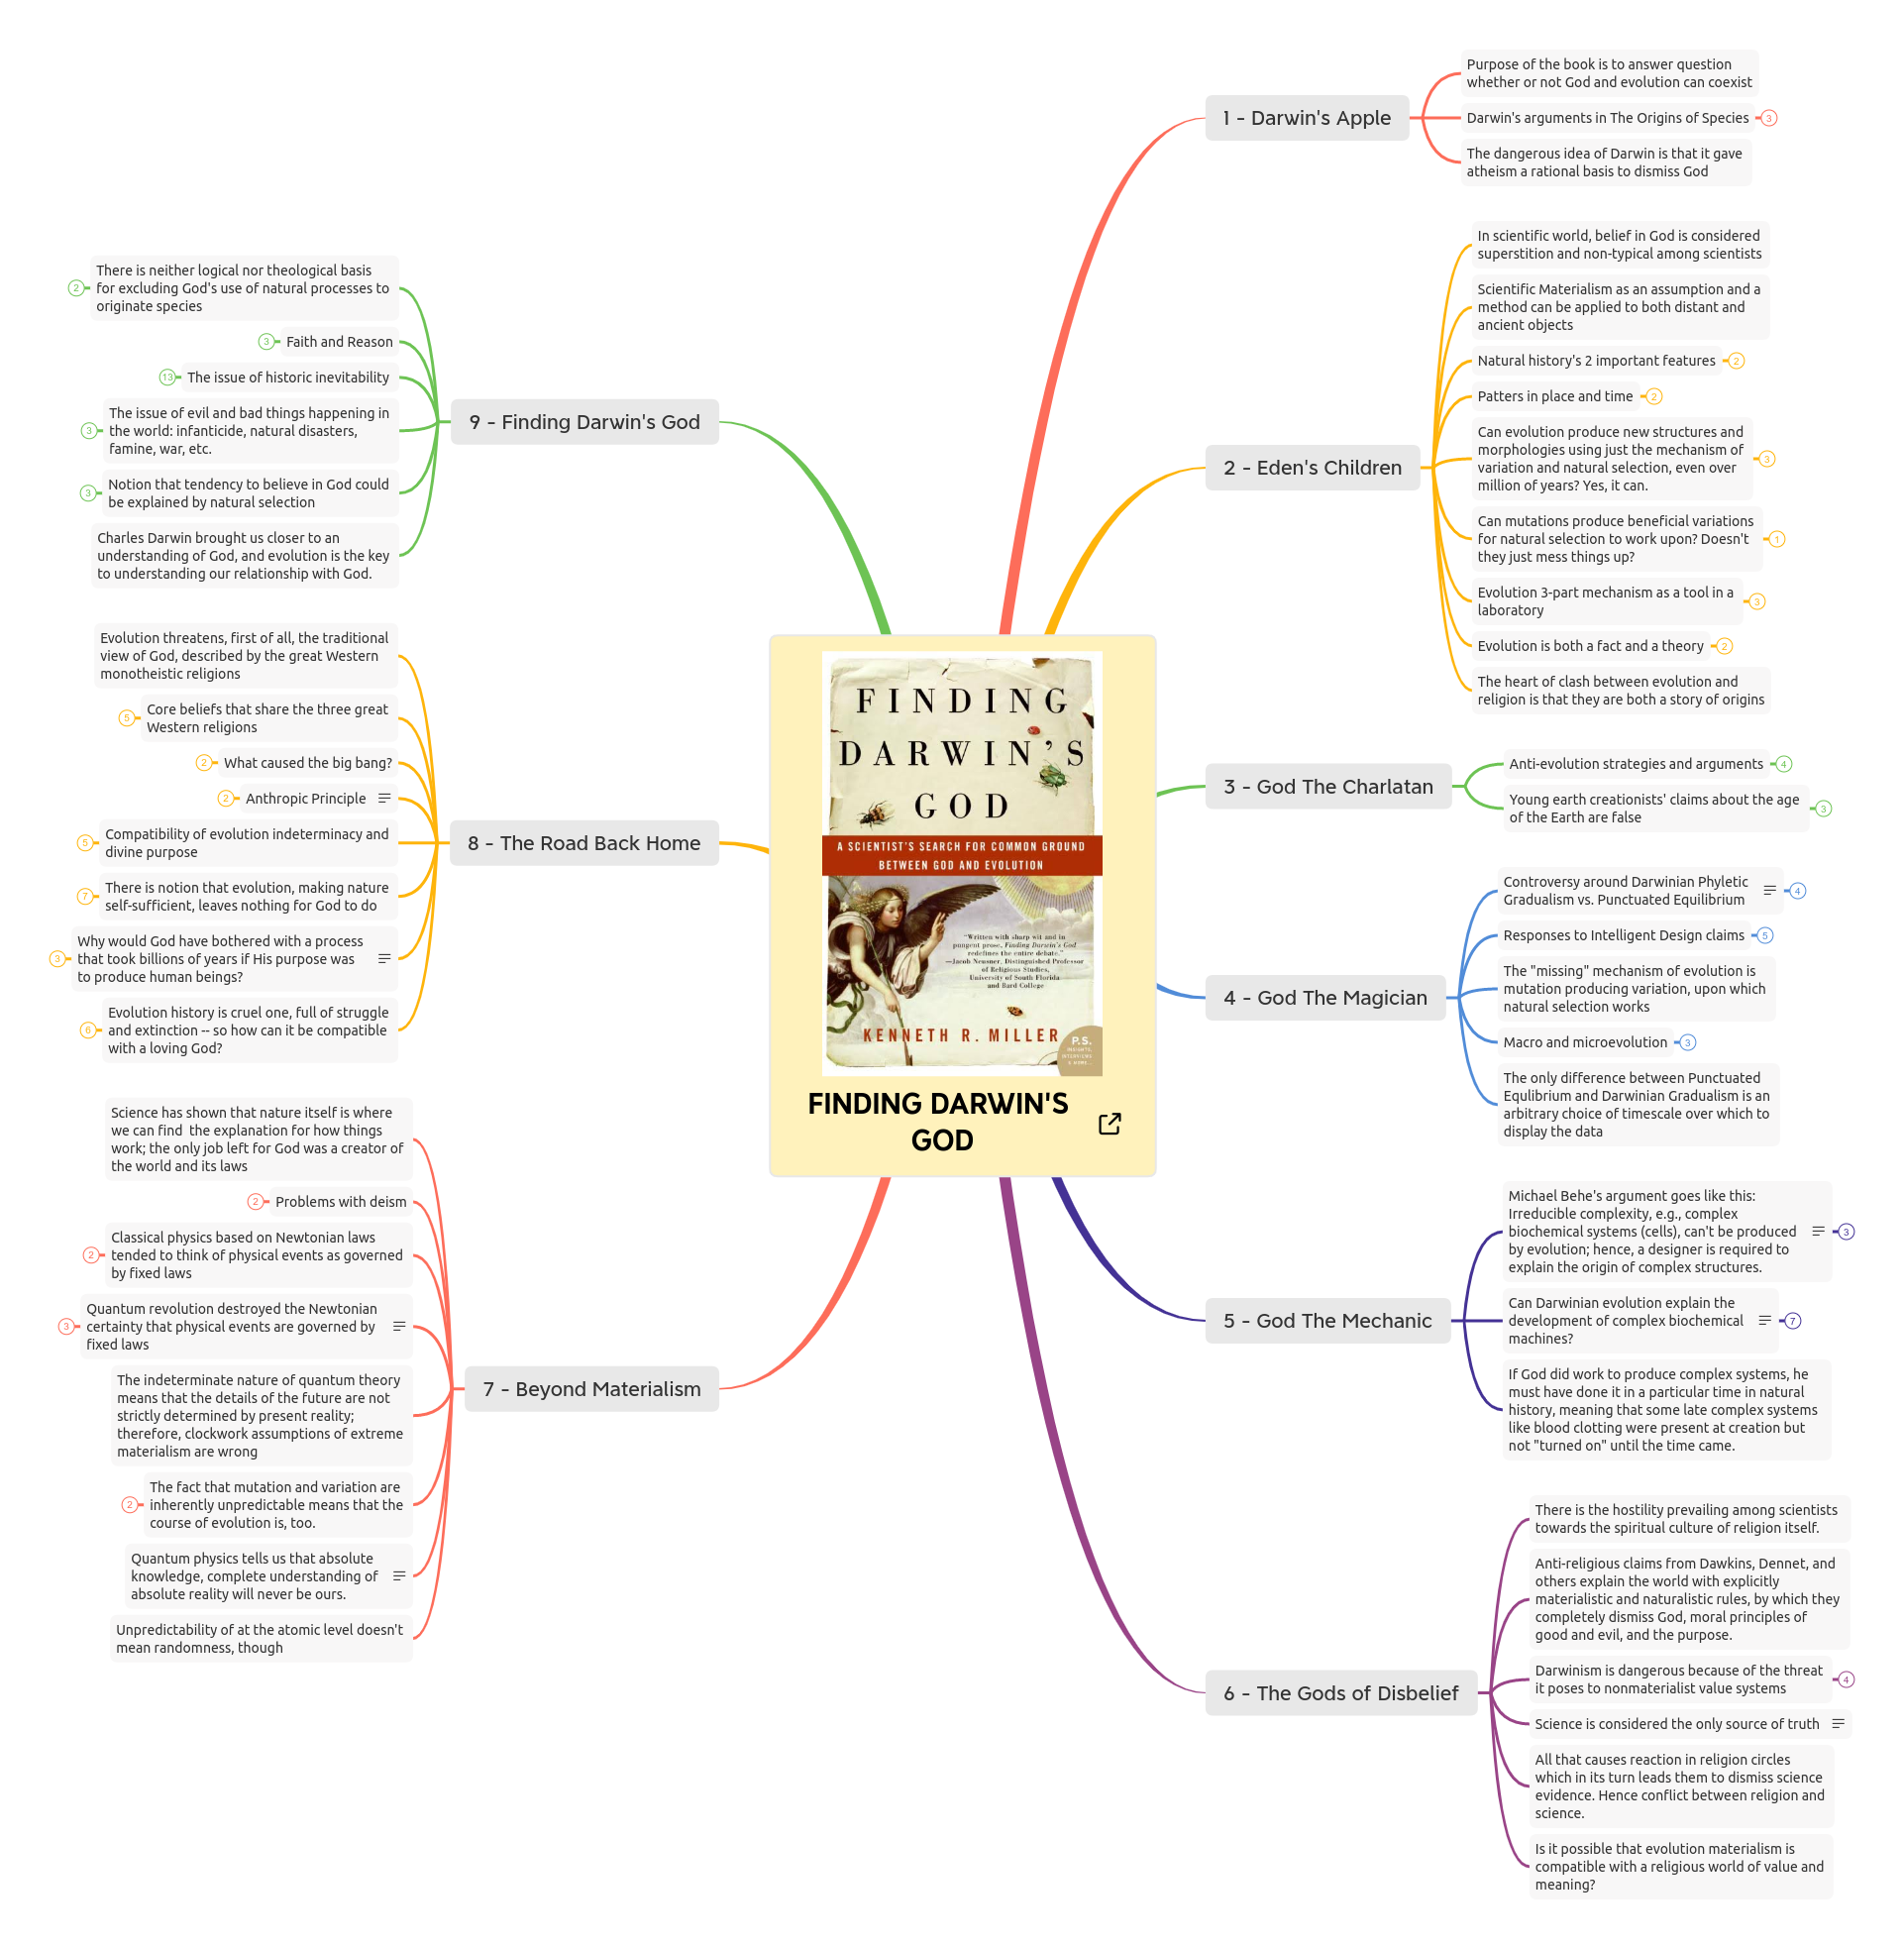 Mindmap of the book published on XMIND